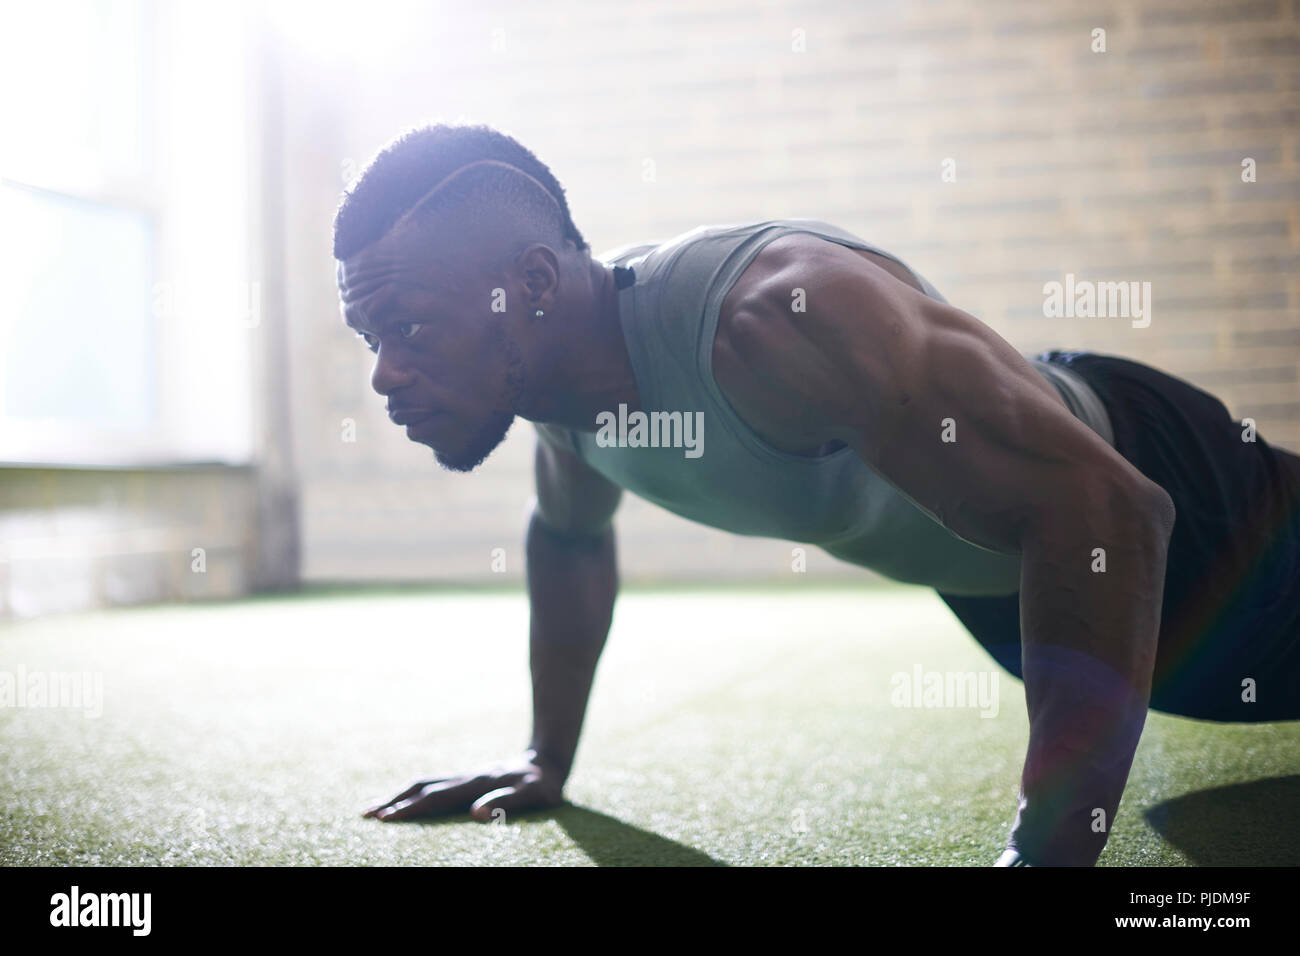 Man doing plank in gym Stock Photo